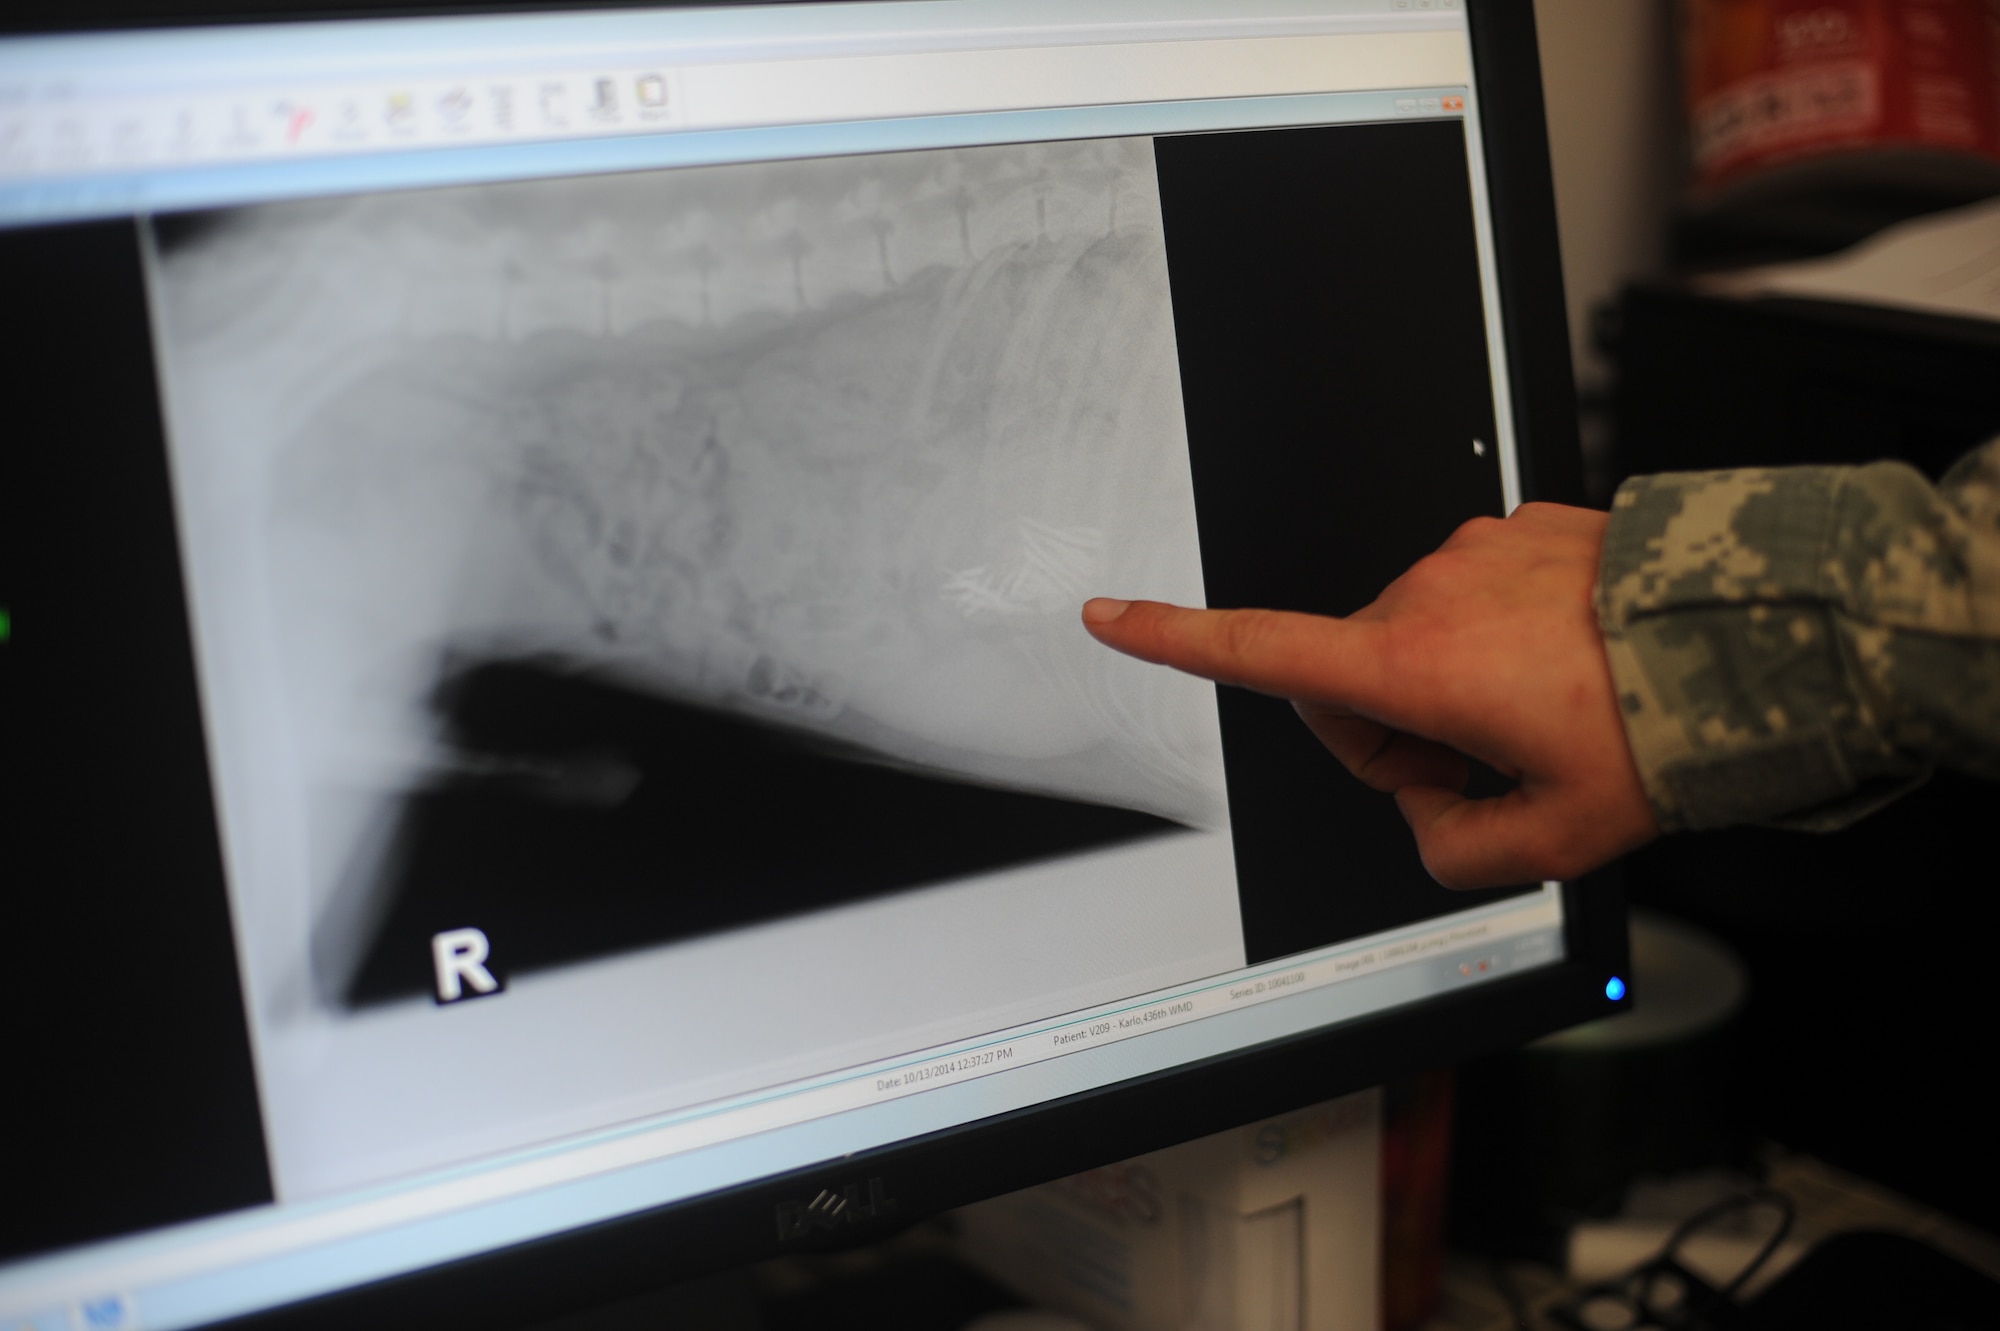 Army Capt. Amanda Jeffries, Chief of Dover Branch Veterinary Services, examines a radiograph of a canine October 15, 2014, at the Veterinary Treatment Facility on Dover Air Force Base, Del. The VTF conducts regular health exams, blood work, radiographs and dental cleanings of Dover’s Military Working Dogs. (U.S. Air Force photo by Staff Sgt. Elizabeth Morris)